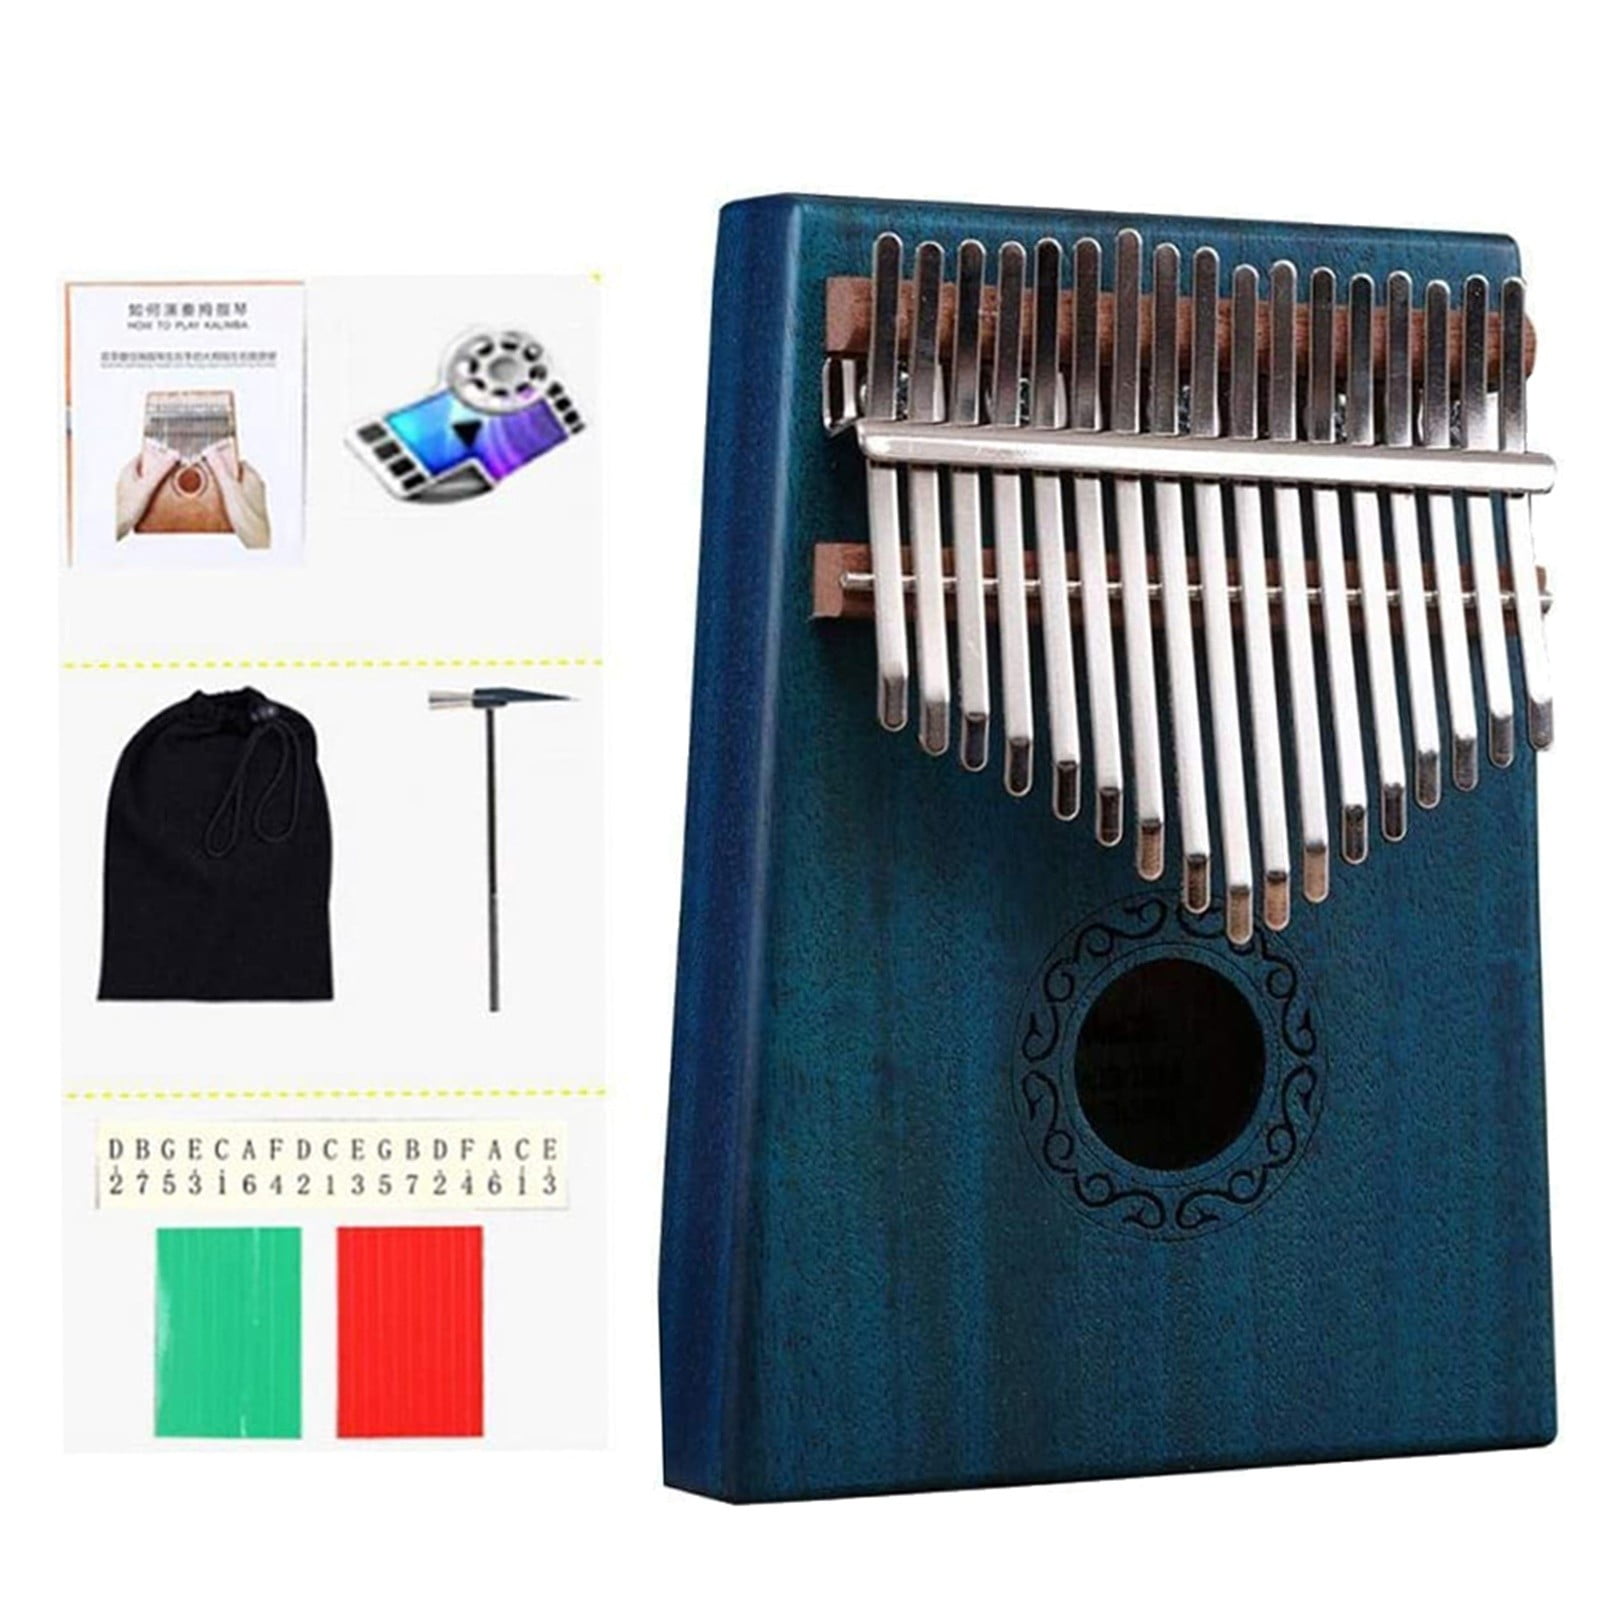 Thumb Piano Sound Finger Piano Beginner Entry Portable Musical Instrument